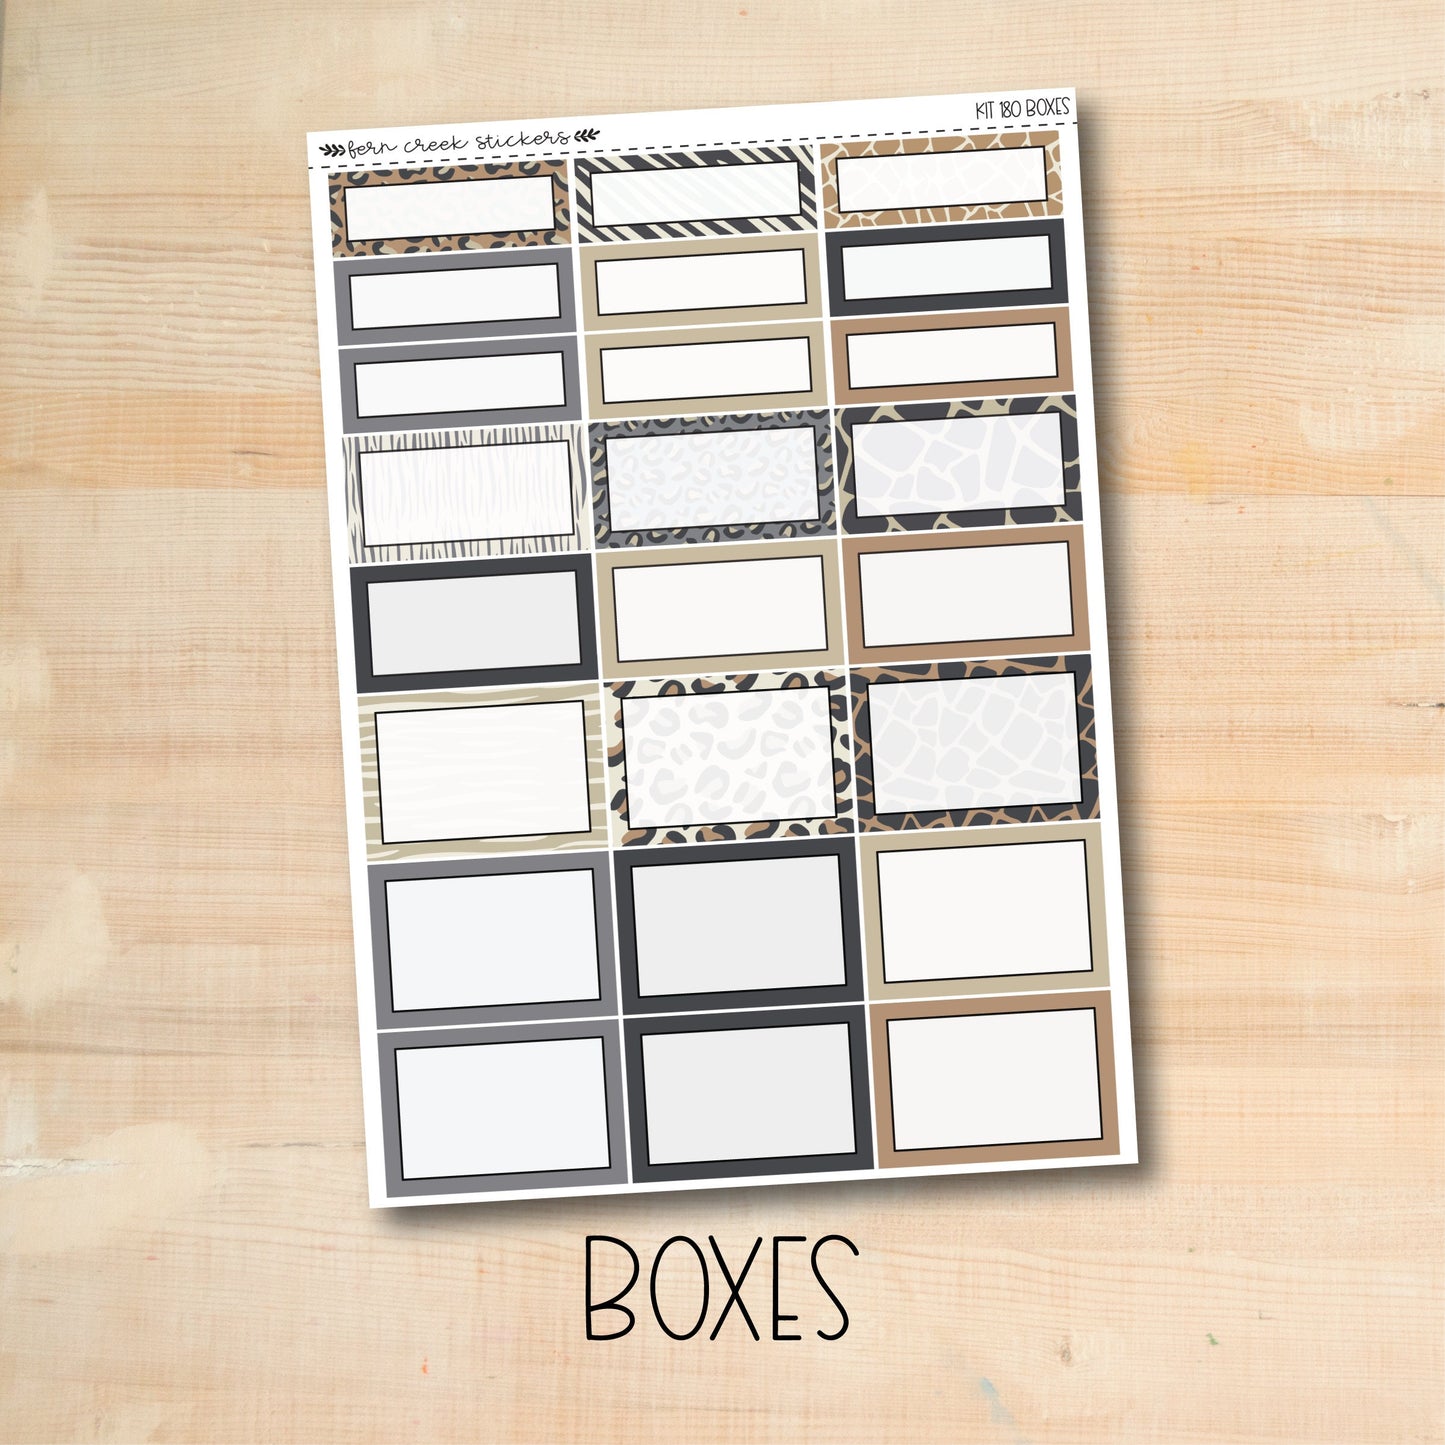 KIT-180 || NEUTRAL SAFARI weekly planner kit for Erin Condren, Plum Paper, MakseLife and more!